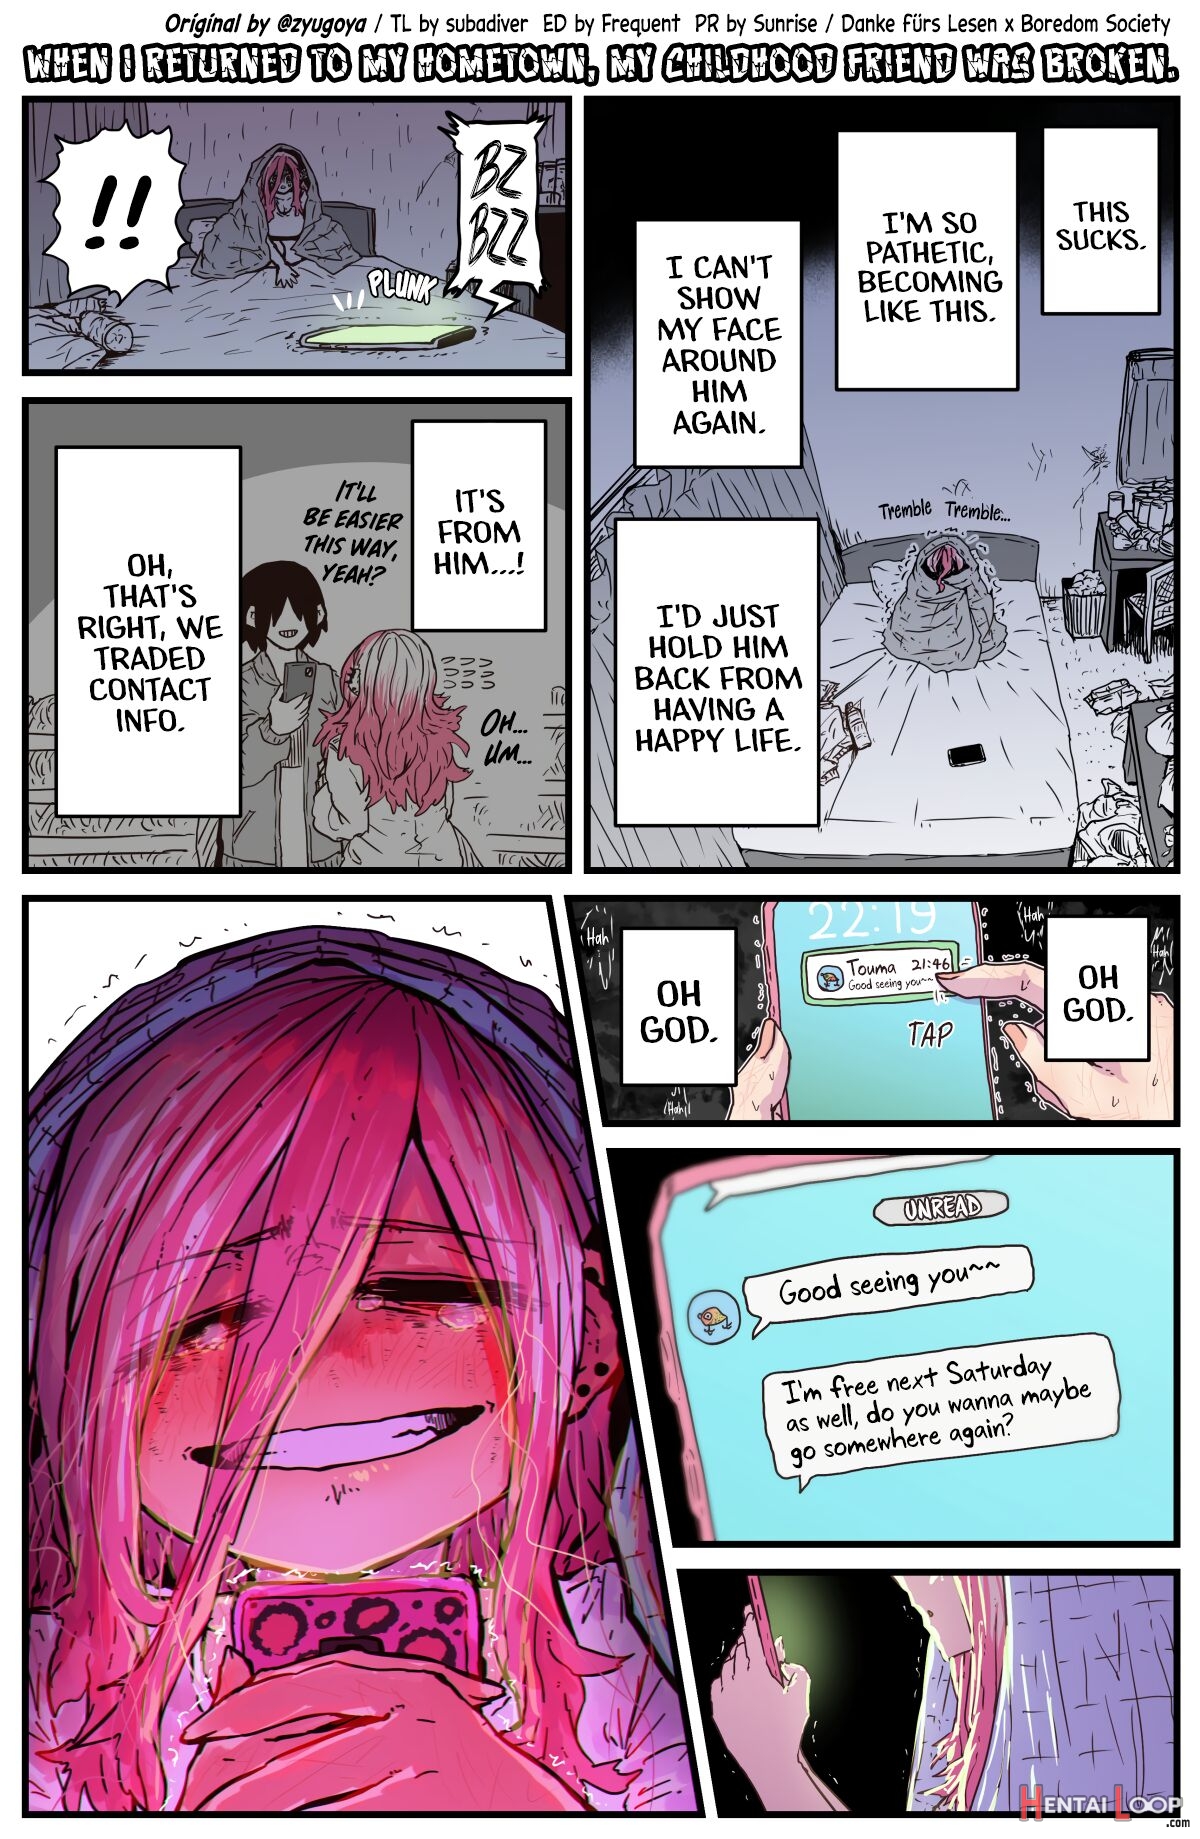 When I Returned To My Hometown, My Childhood Friend Was Broken page 12